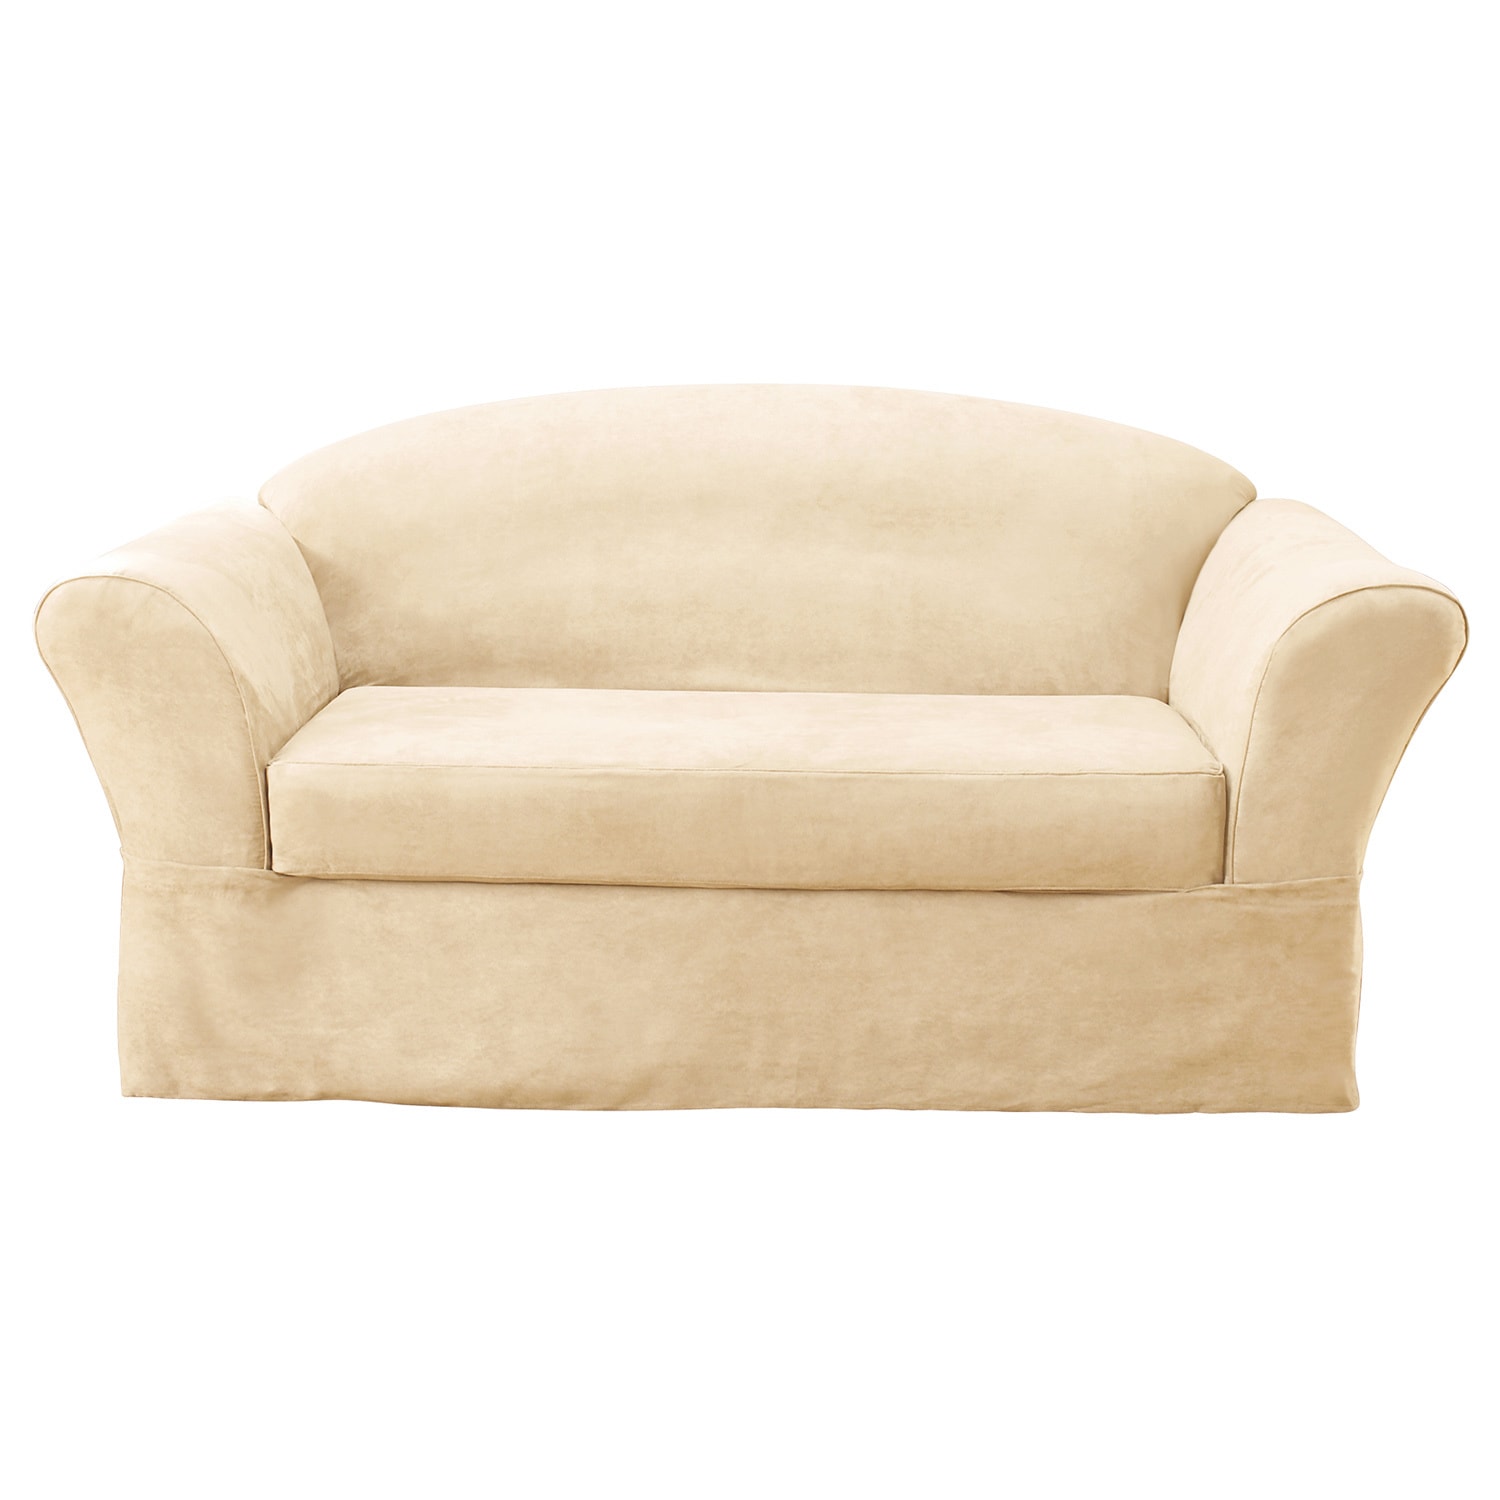 Sure Fit Suede Supreme Taupe Sofa Slipcover - Bed Bath & Beyond